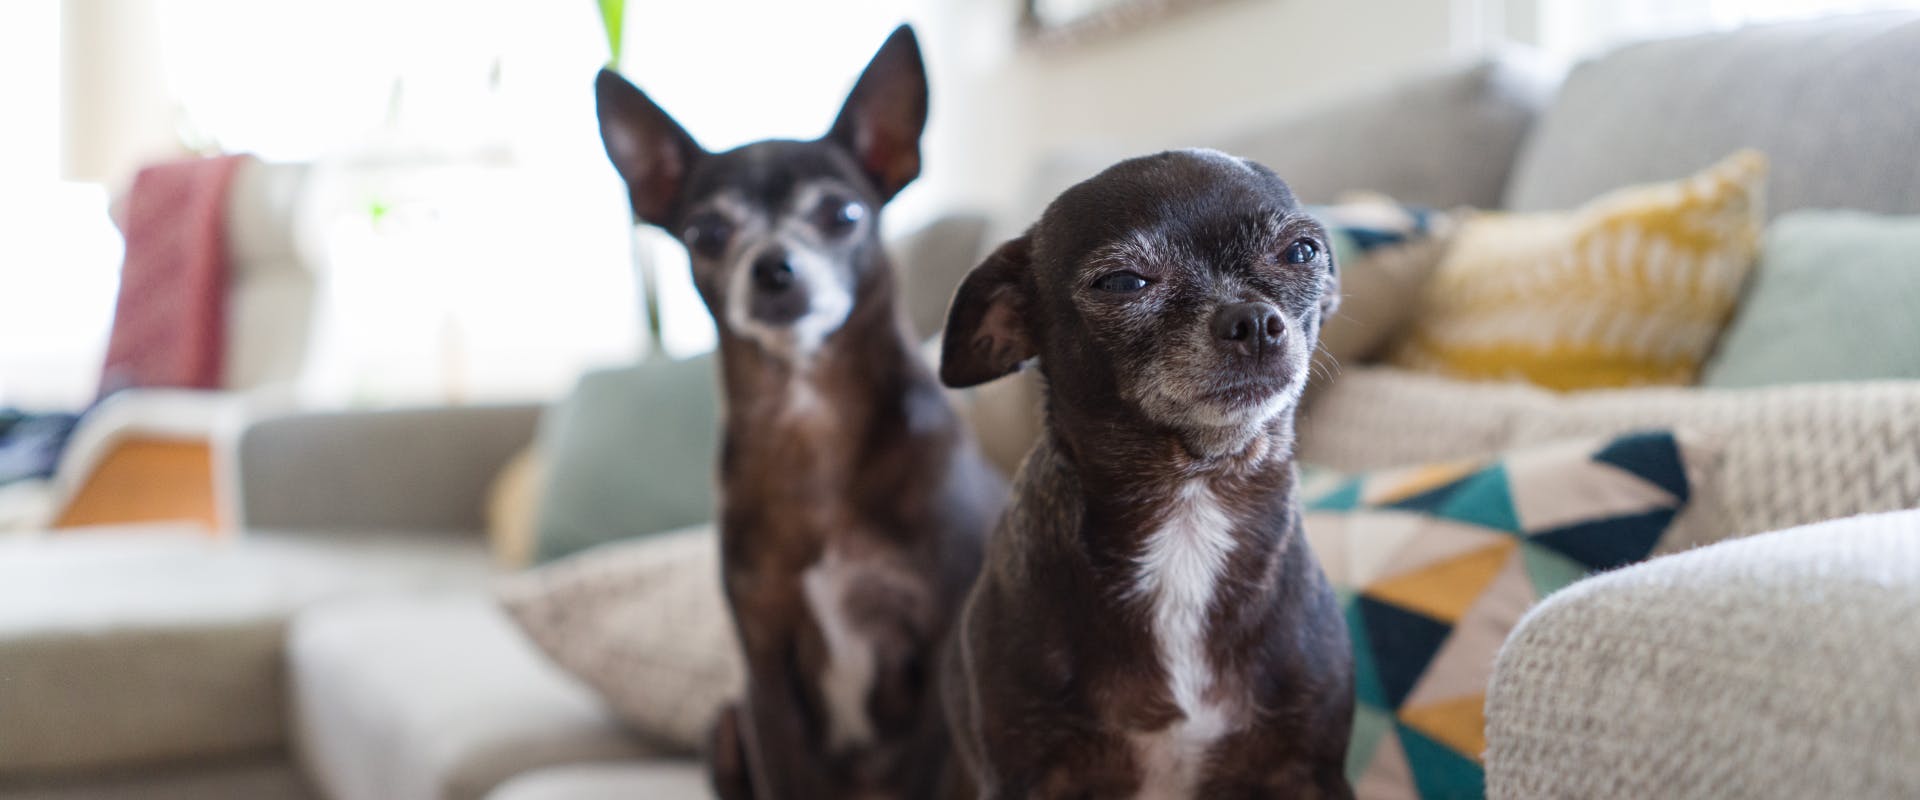 two small elderly dogs sitting on a gray couch